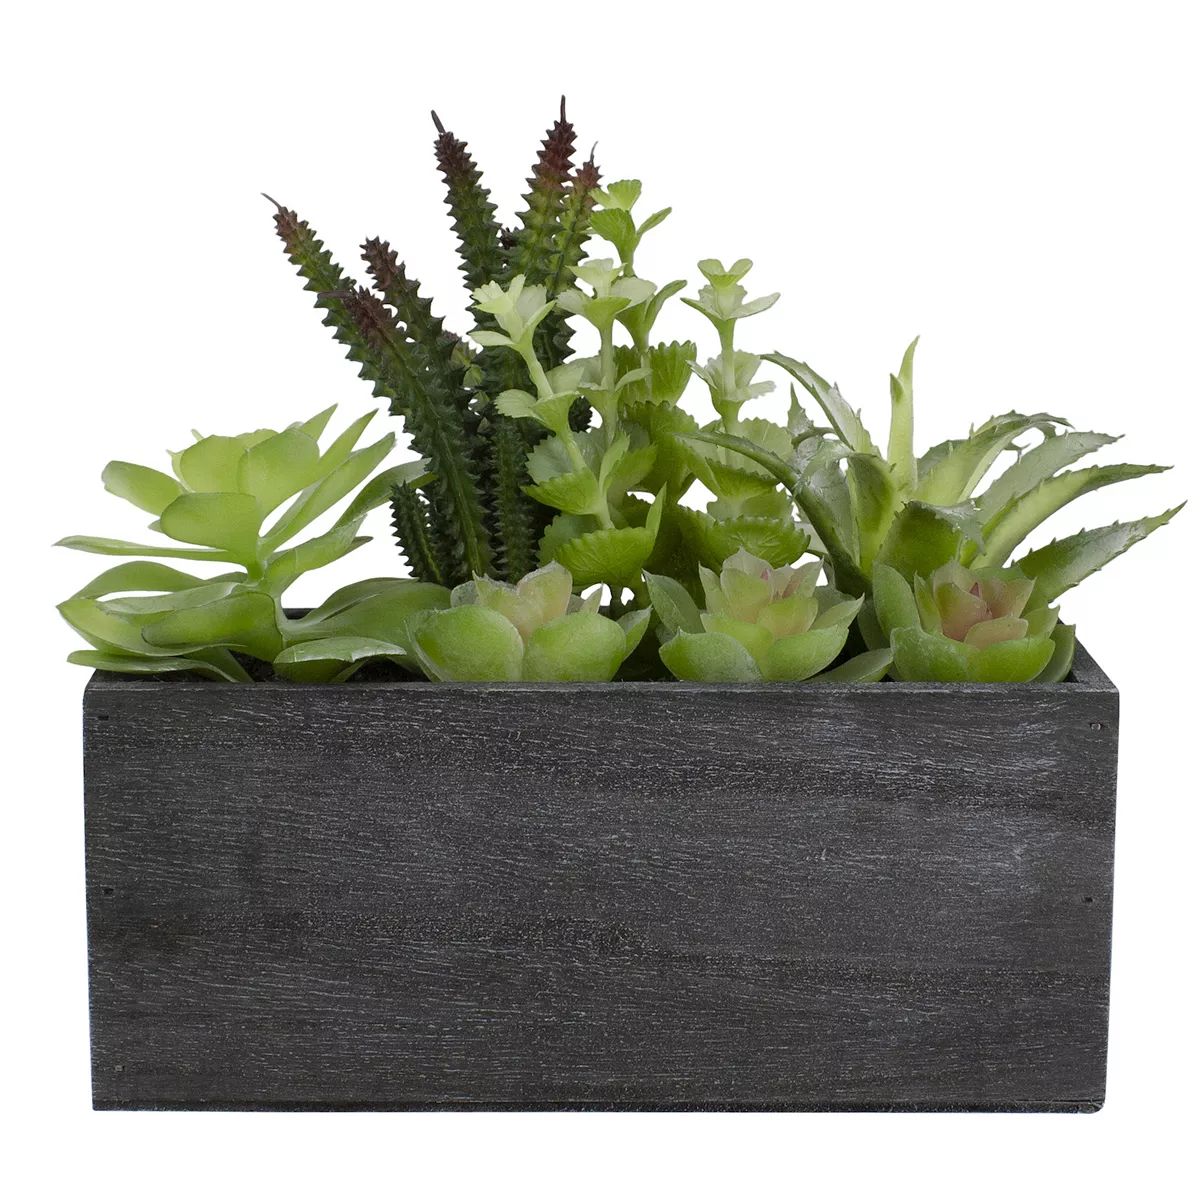 10" Artificial Mixed Succulent Plants in a Rectangular Planter | Kohl's